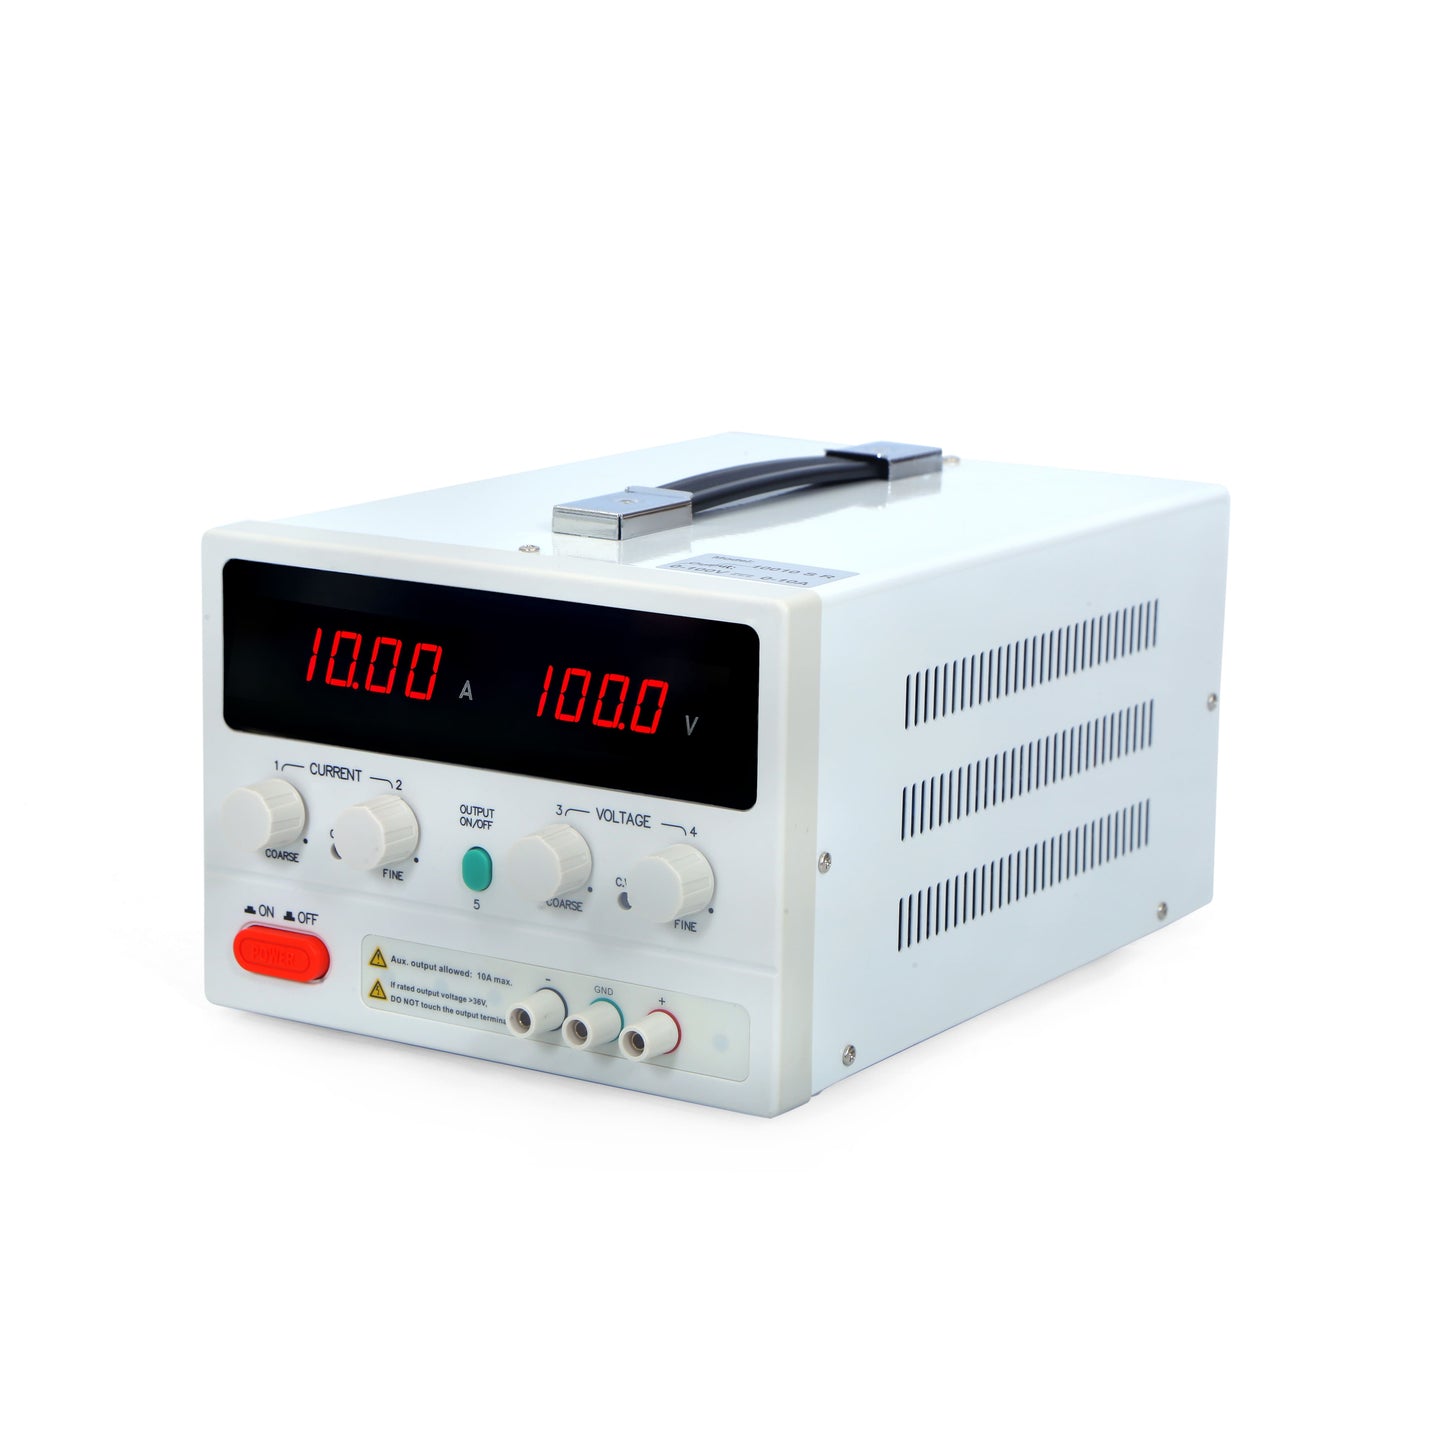 3040 SR 30V 40A SMPS Based DC Regulated Power supply with PC Interface